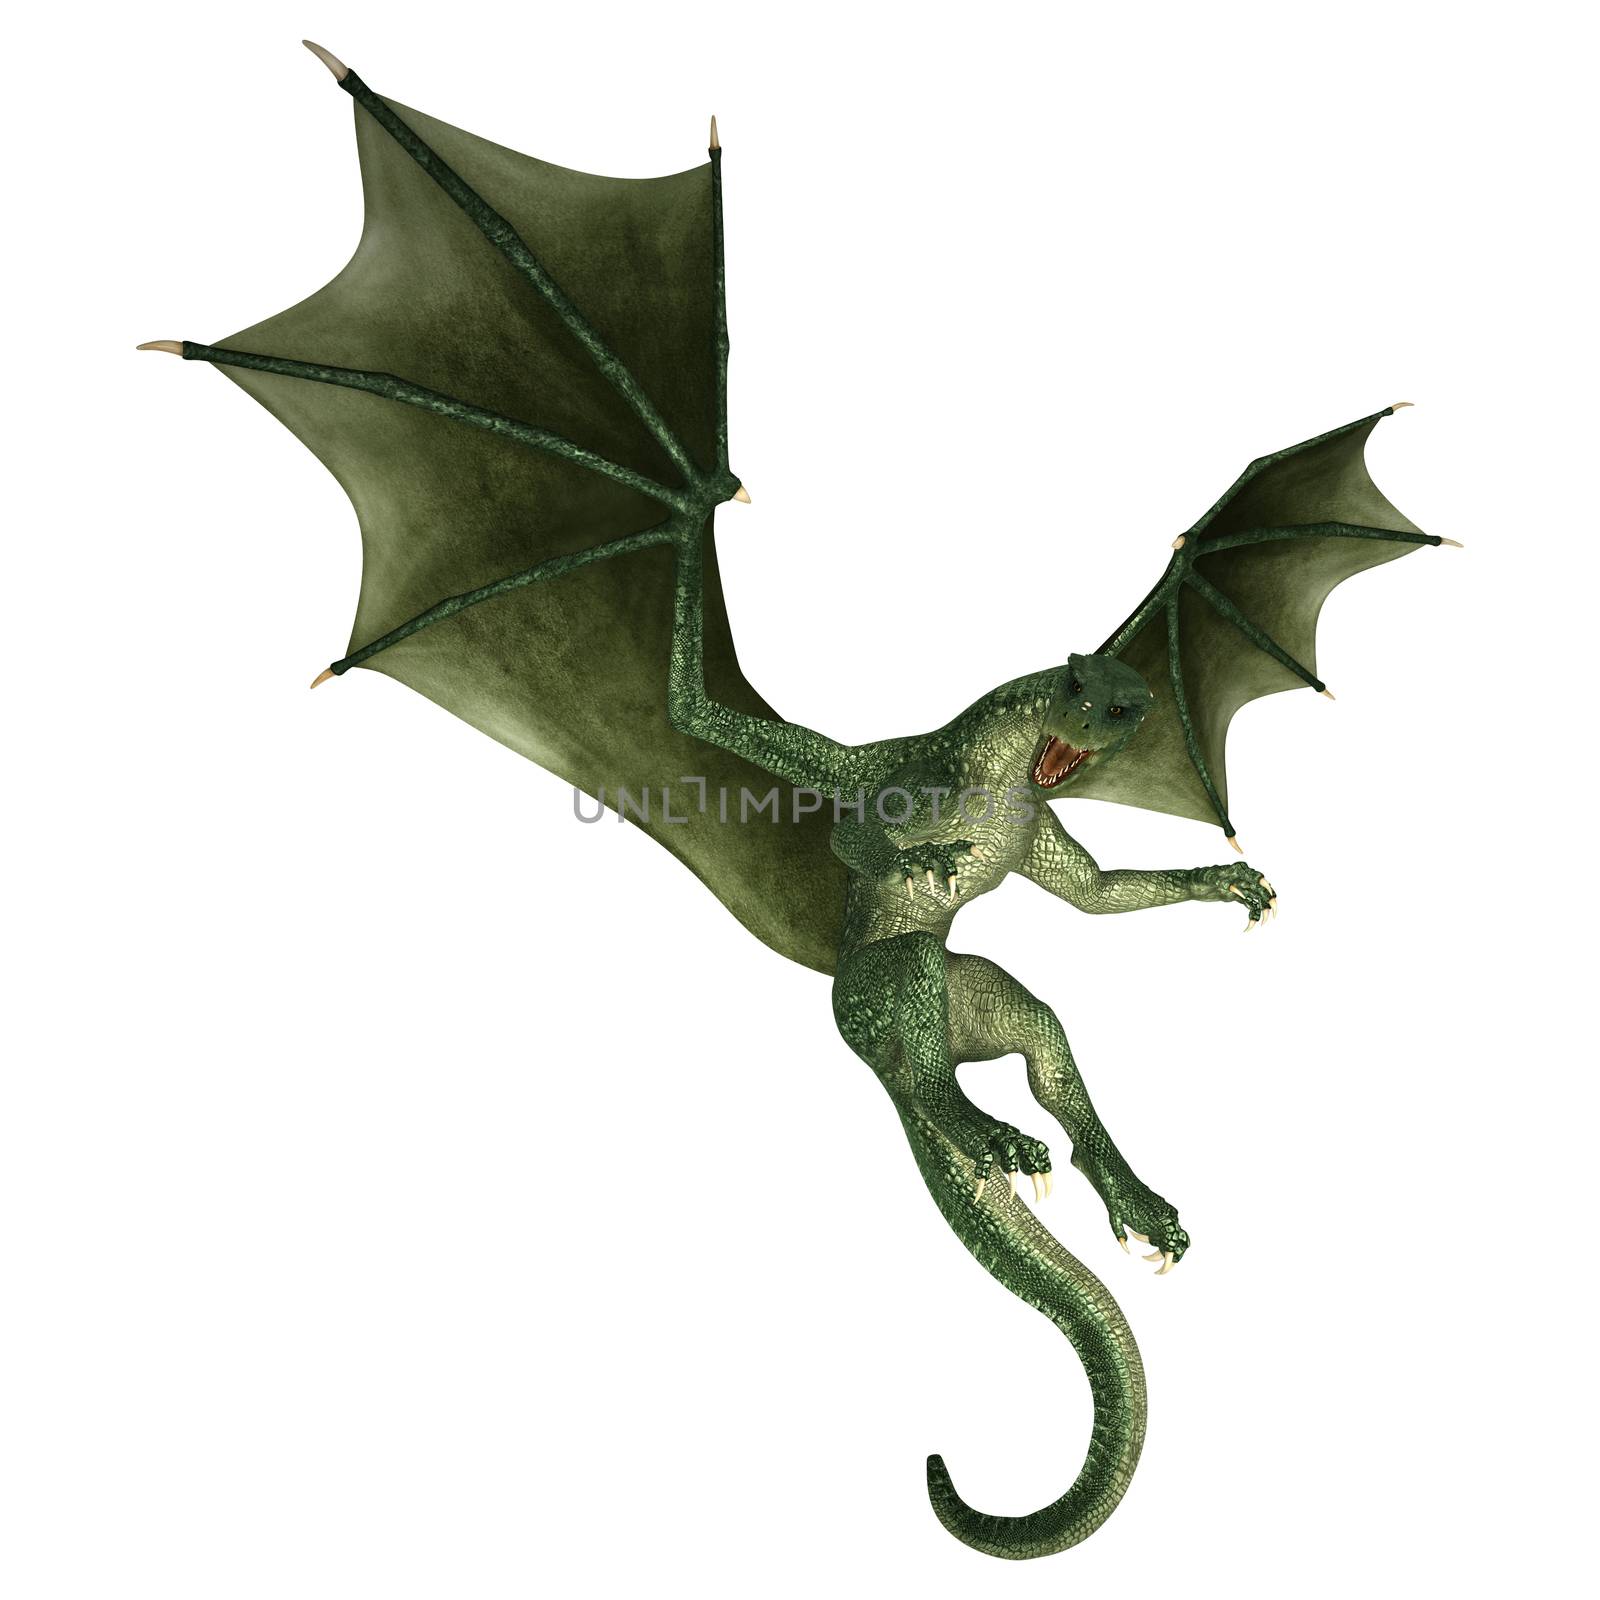 3D digital render of a green fantasy dragon flying isolated on white background